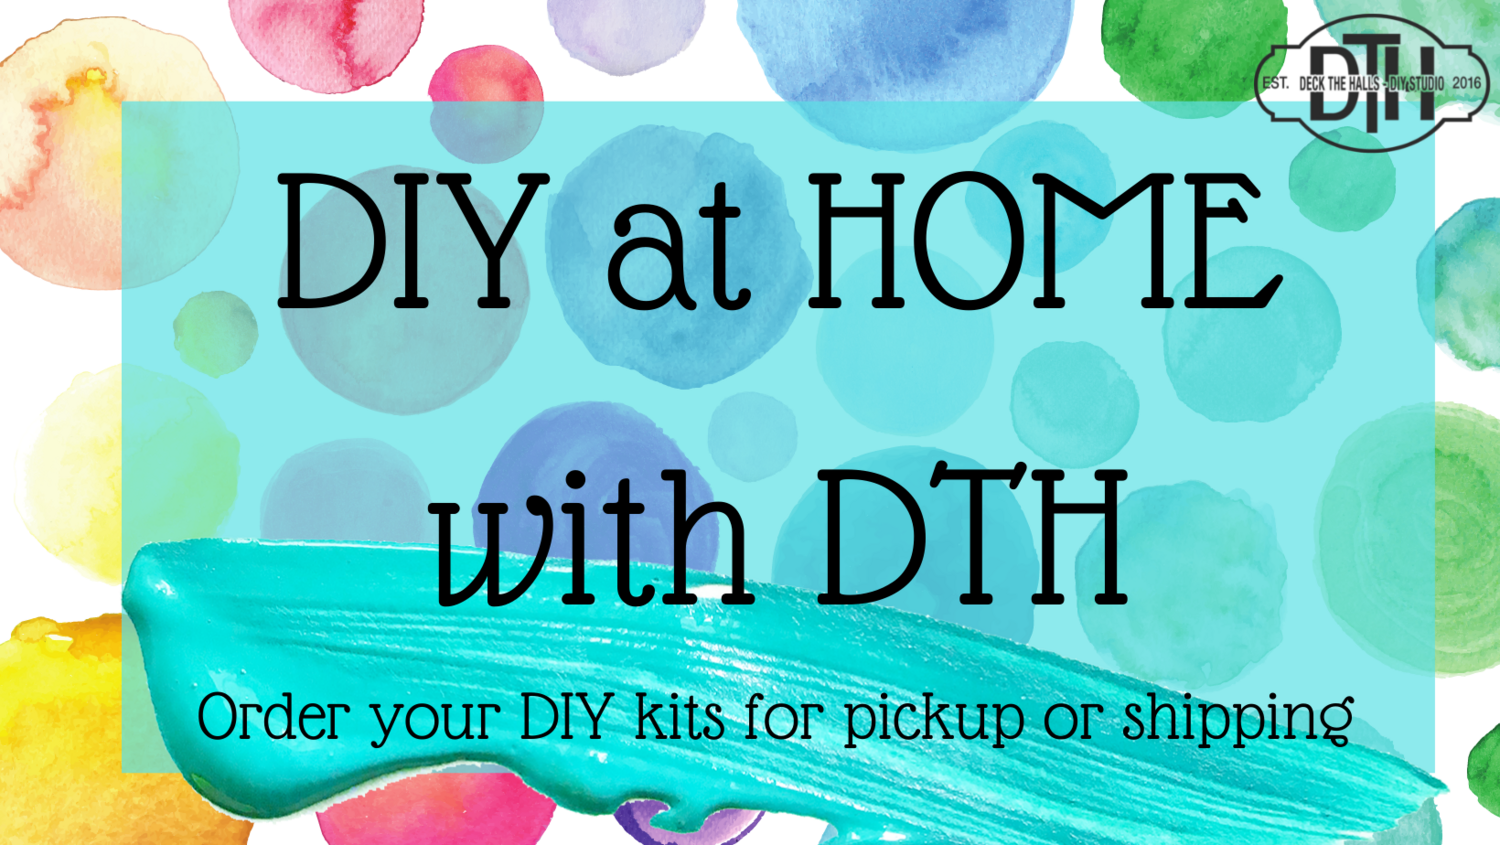 DIY at Home with DTH